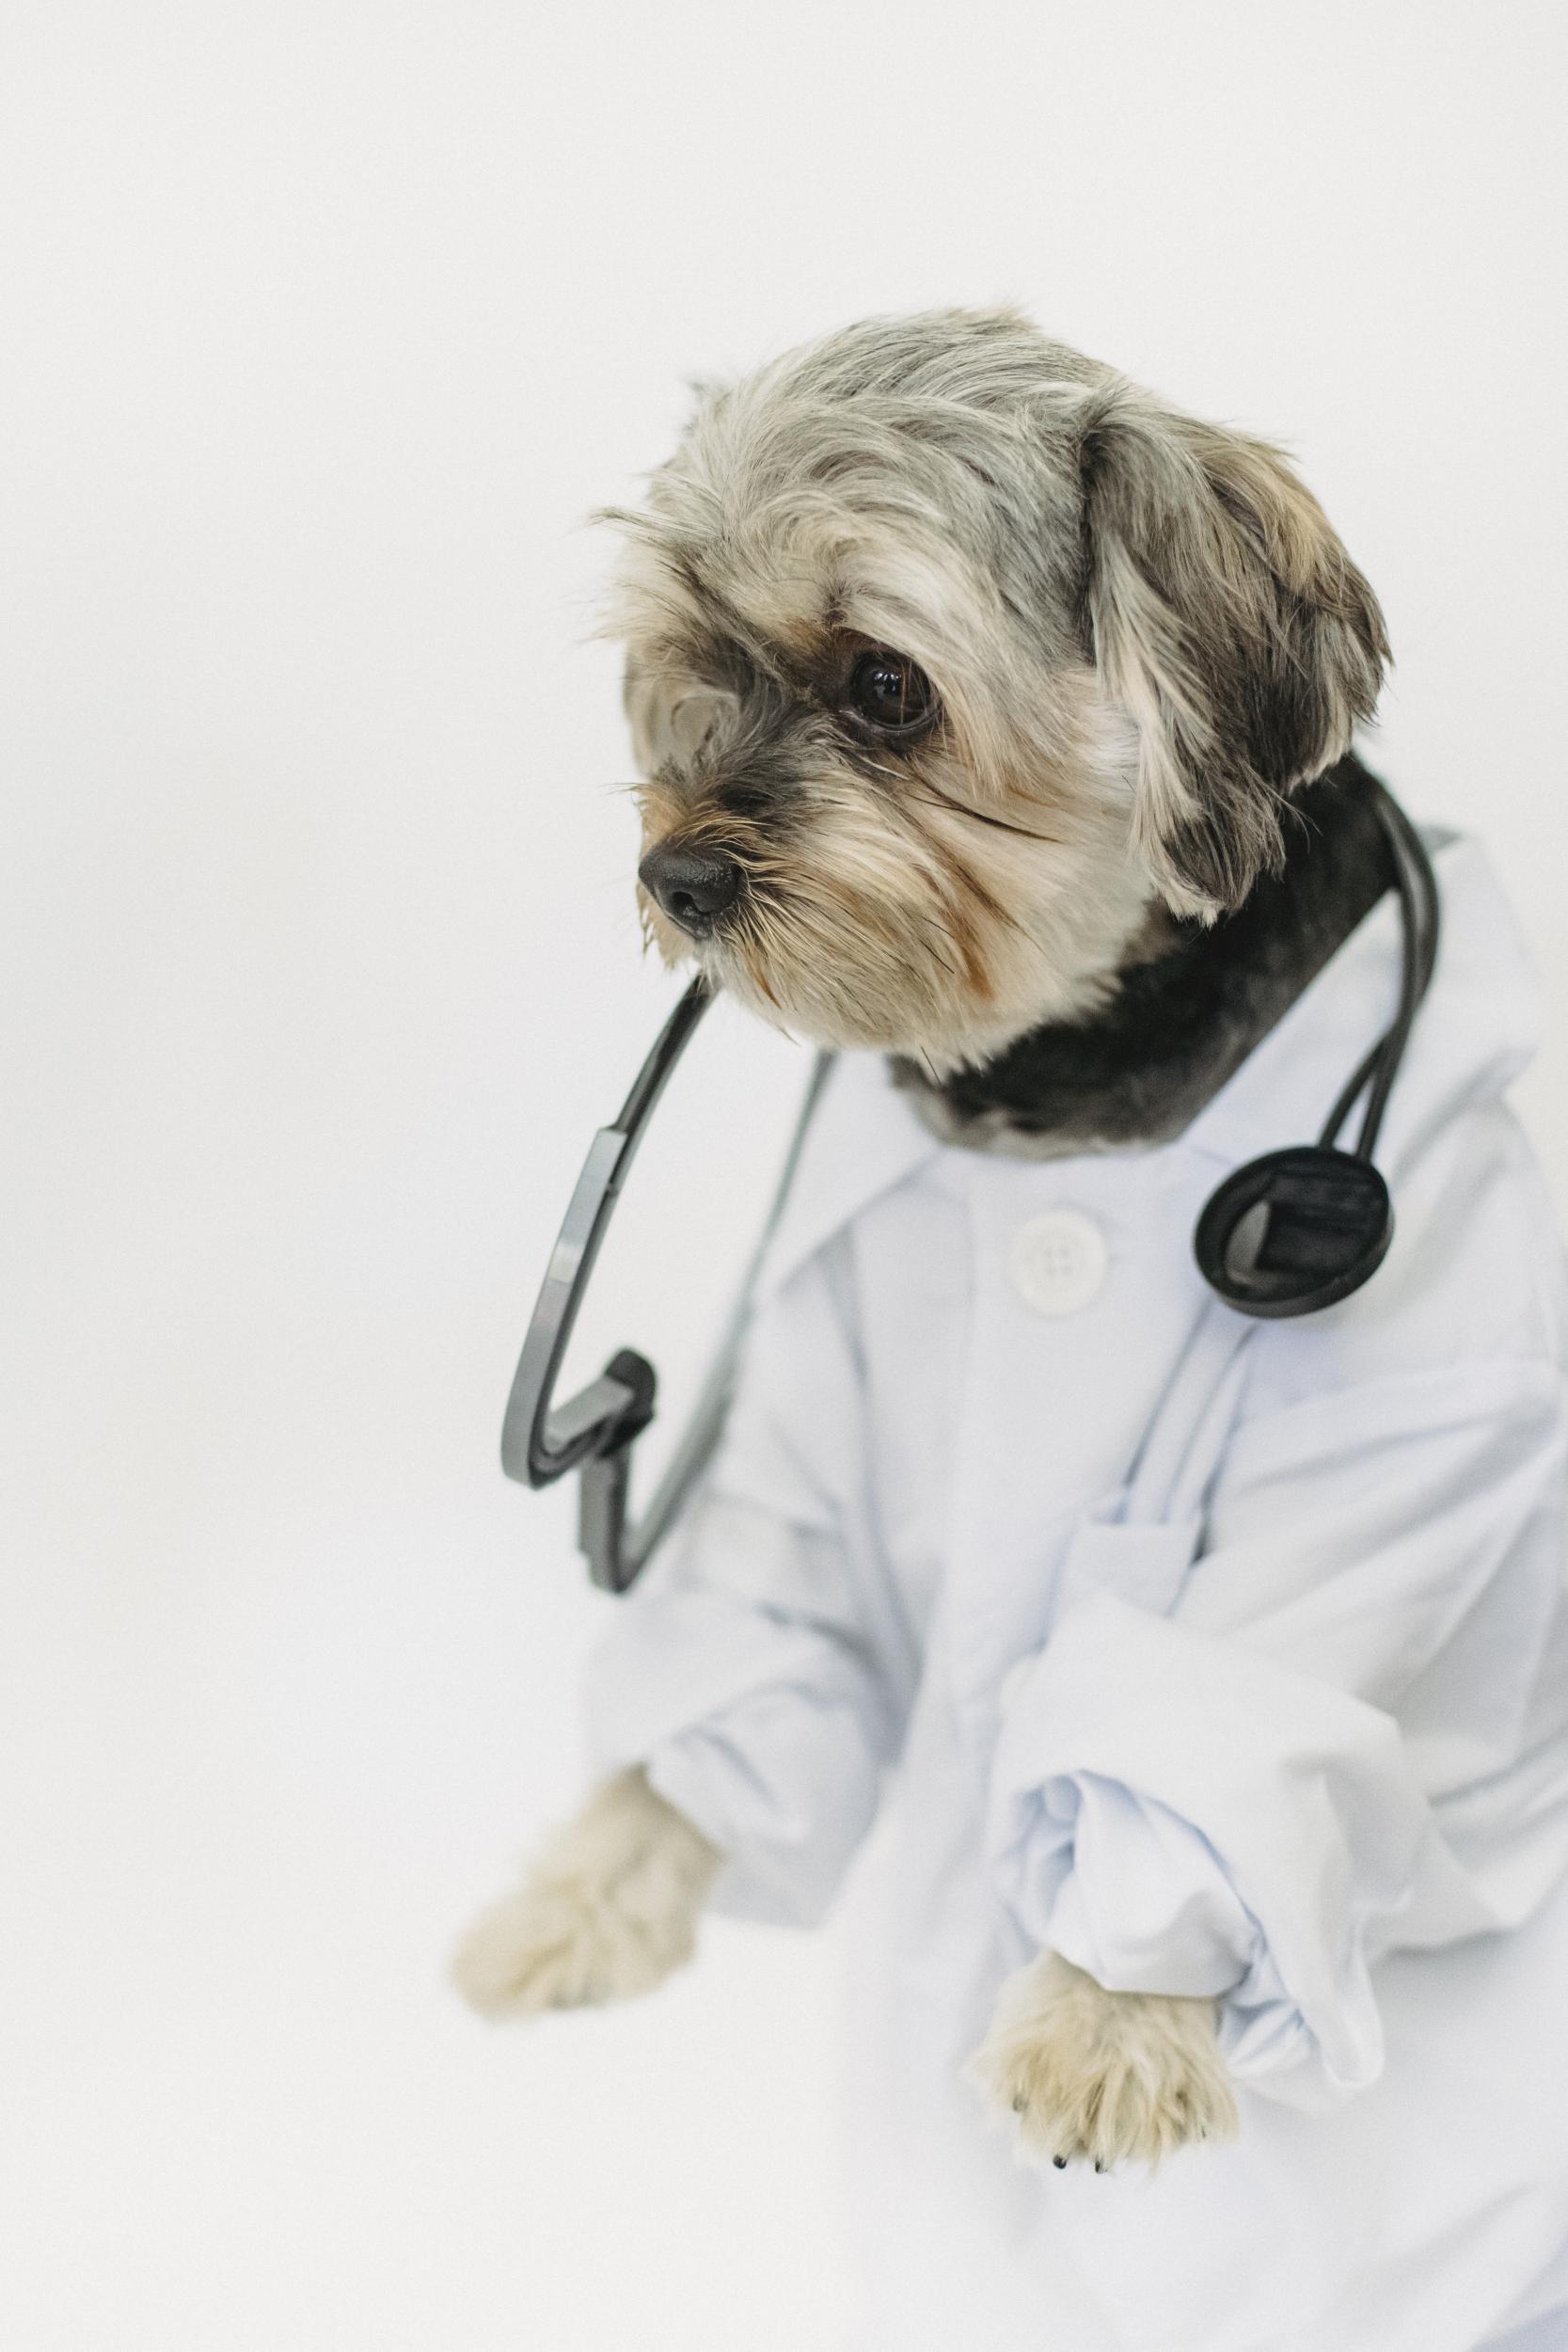 Get Rid Of Fleas With Antiparasitic Treatments At This West Adams, CA Vet Clinic